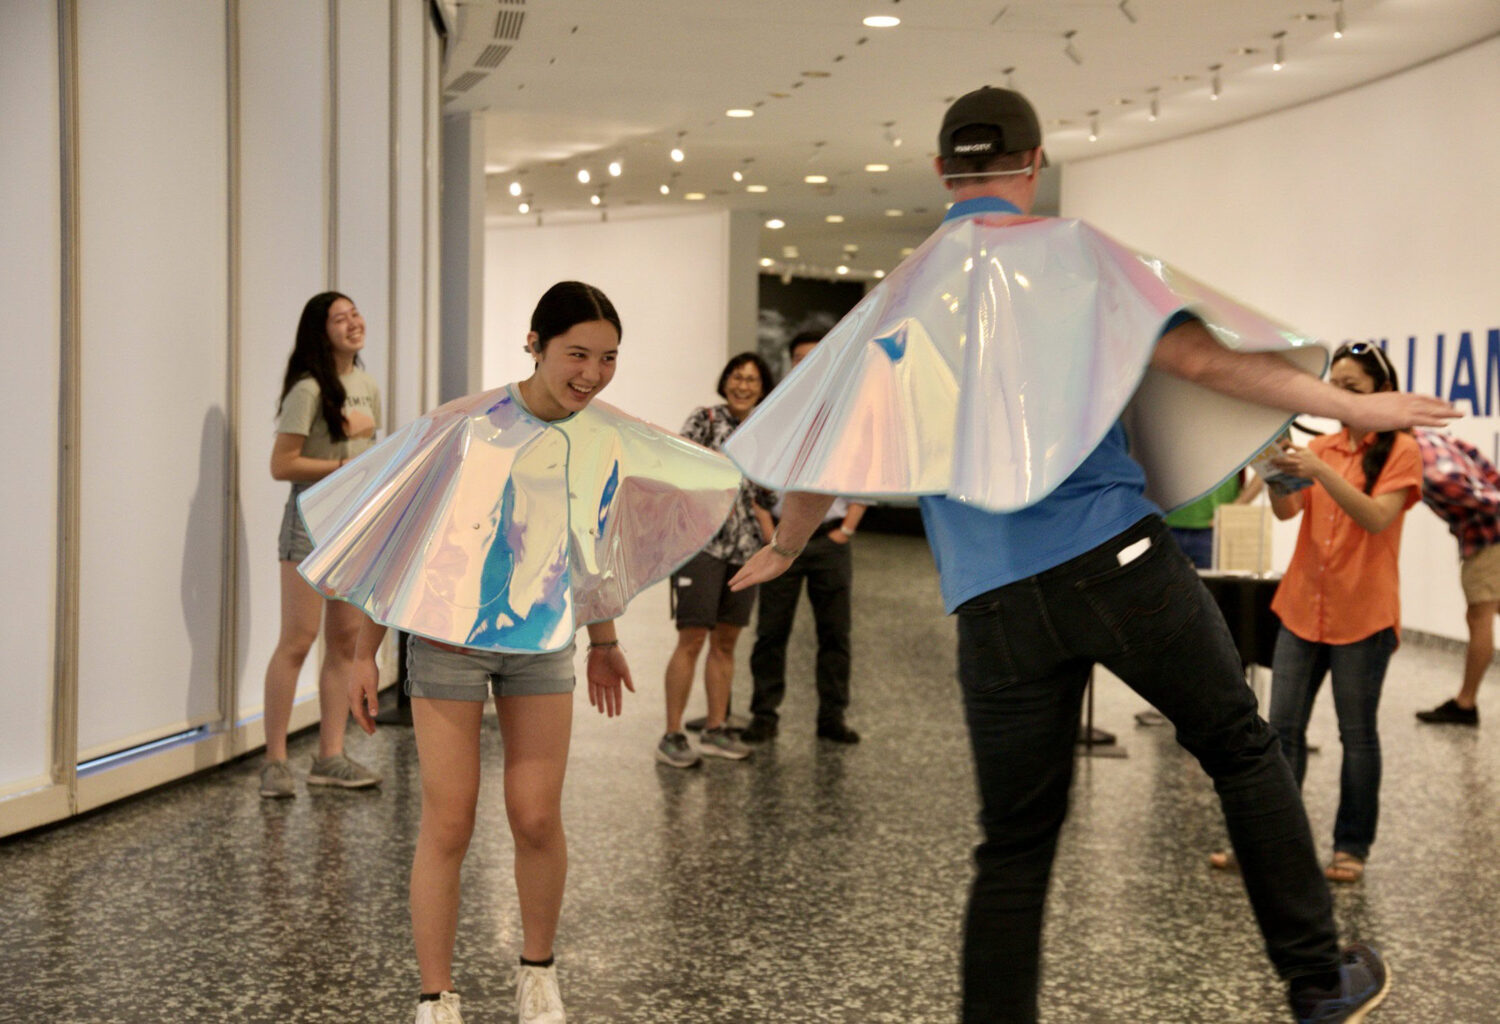 A photo inside what looks to be a circular hall with concrete floors and white walls. There are two people in the foreground dancing around eachother wearing iridescent capes that cover their arms down to their waists. There is a group of onlookers in the background smiling and taking photos of them.